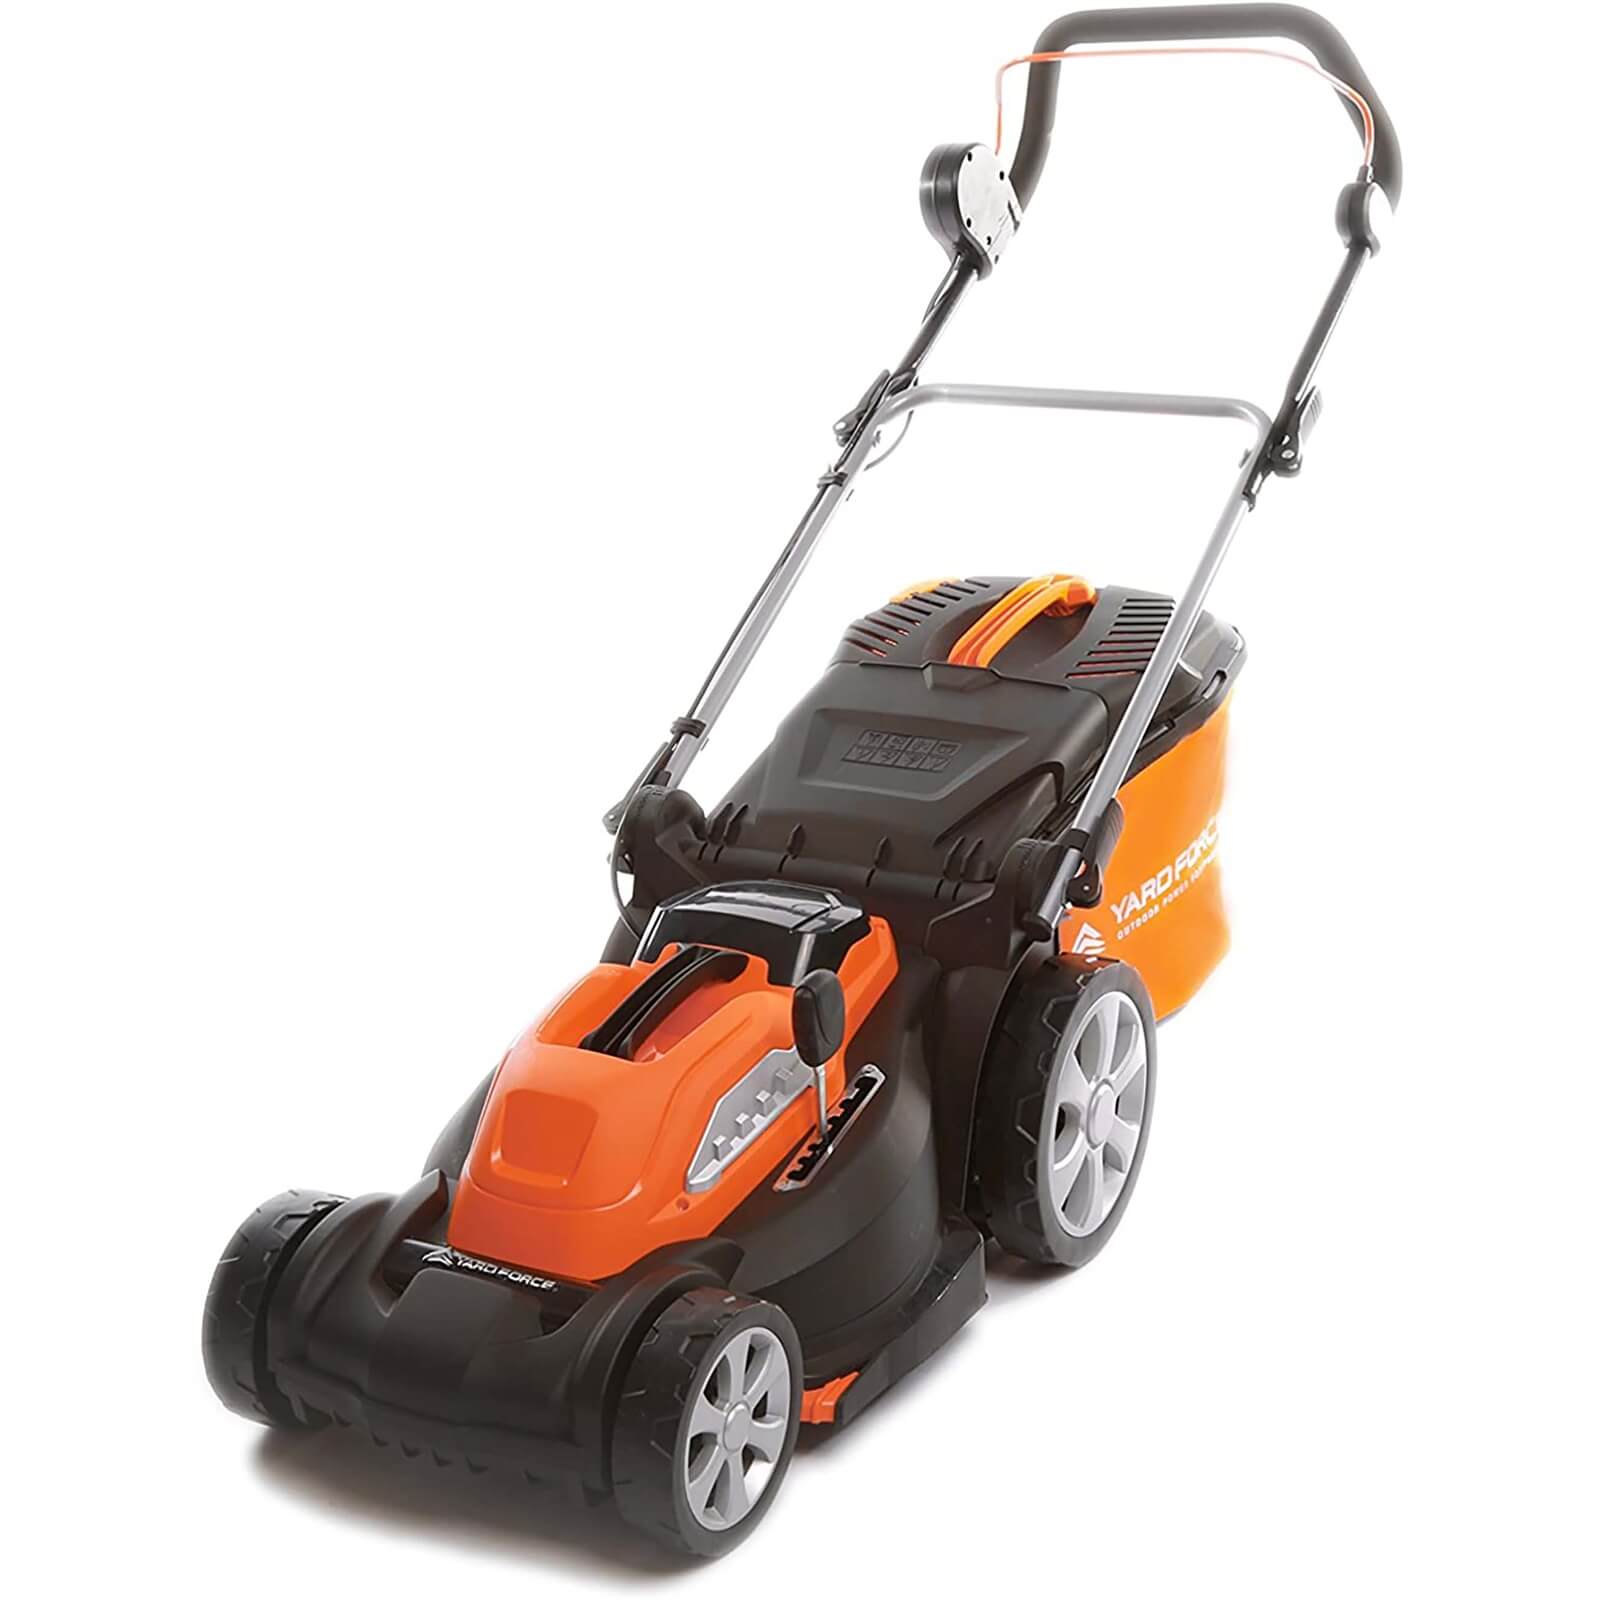 Yard Force 40V 37cm Cordless Lawnmower with 2.5AH Lithium-ion Battery & Quick Charger